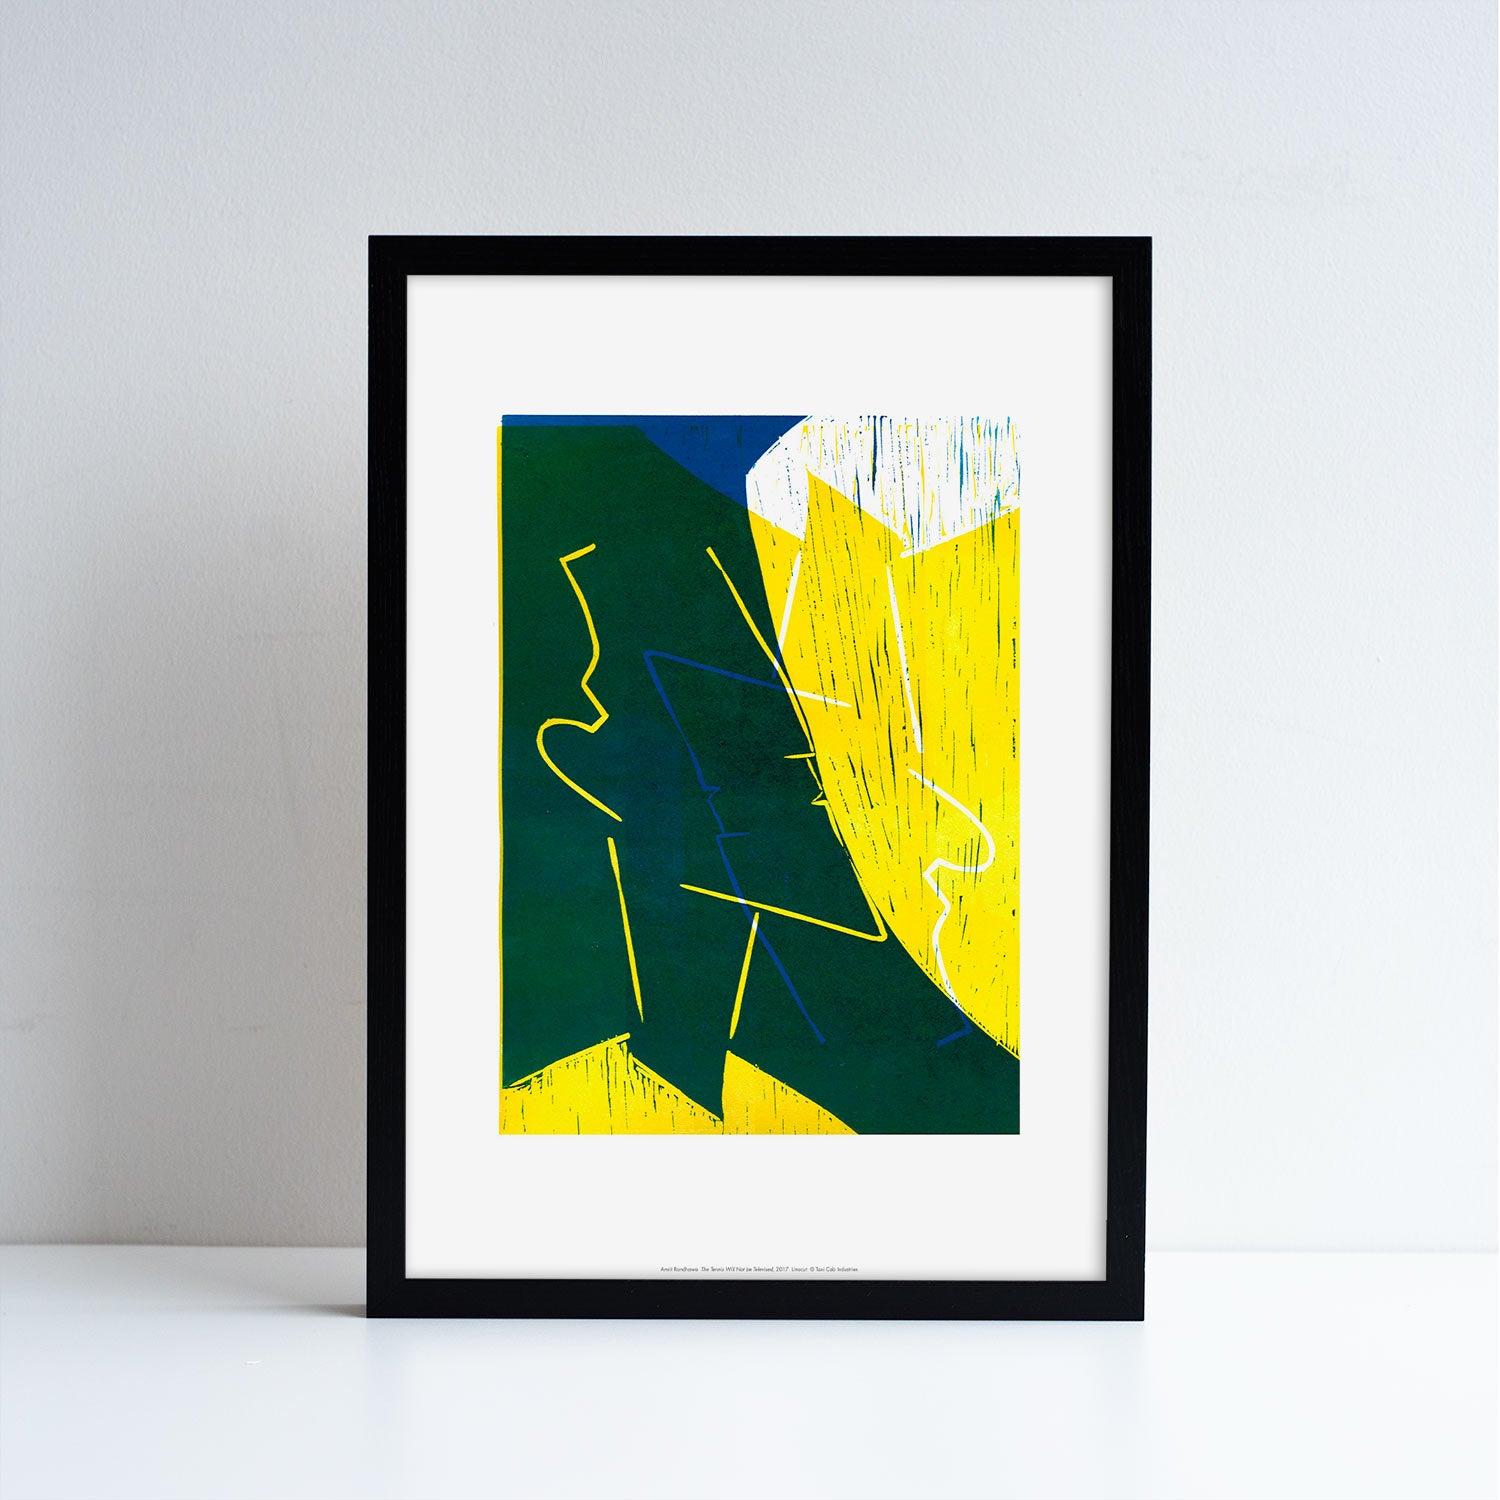 An printed reproduction of an artwork by Amrit Randhawa. Green, yellow, white and blue graphic work. Placed in a black frame.